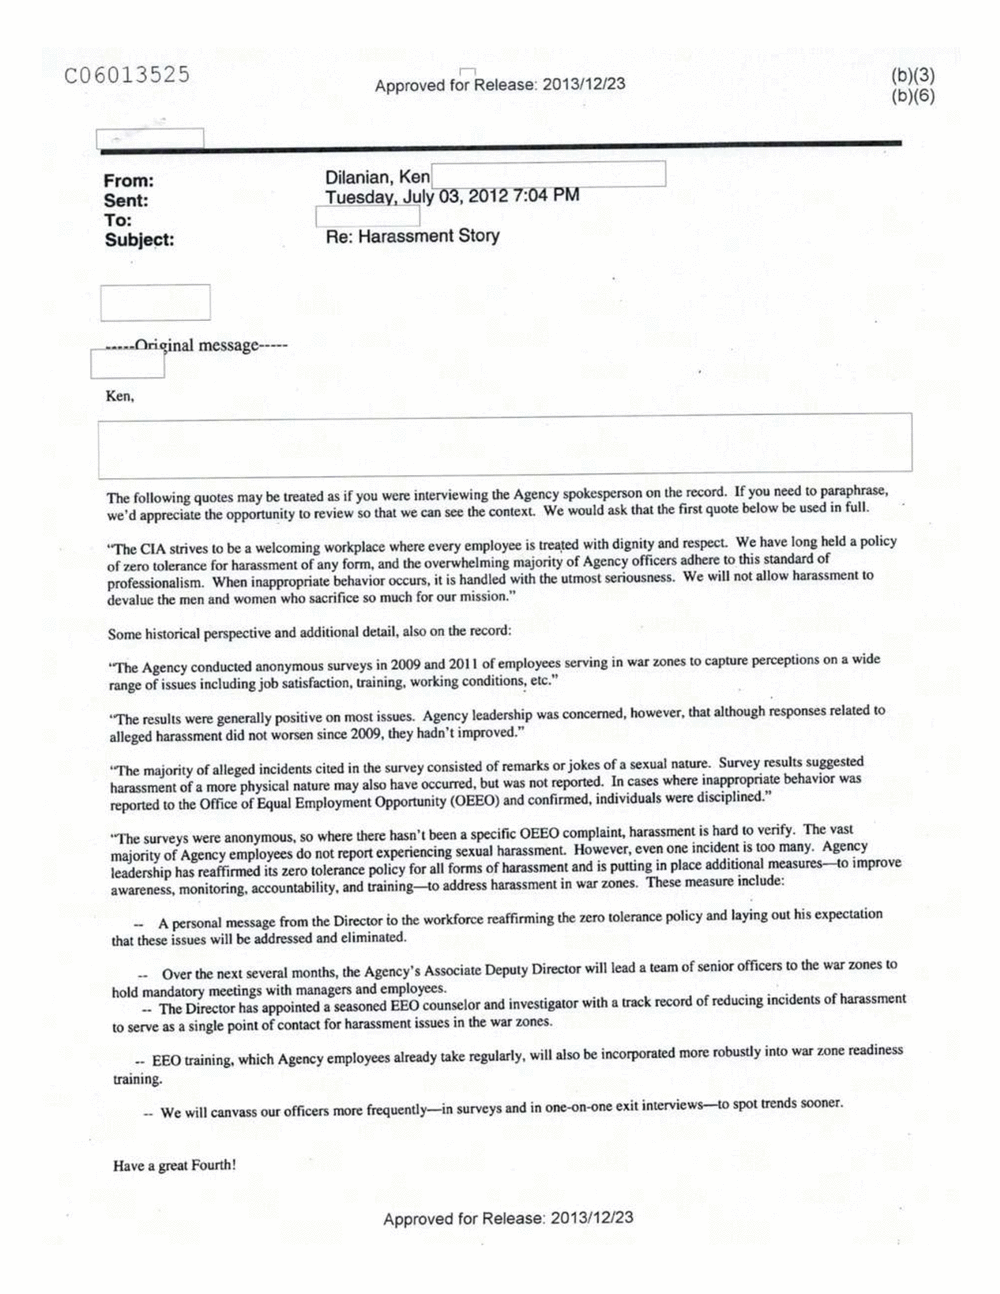 Page 365 from Email Correspondence Between Reporters and CIA Flacks